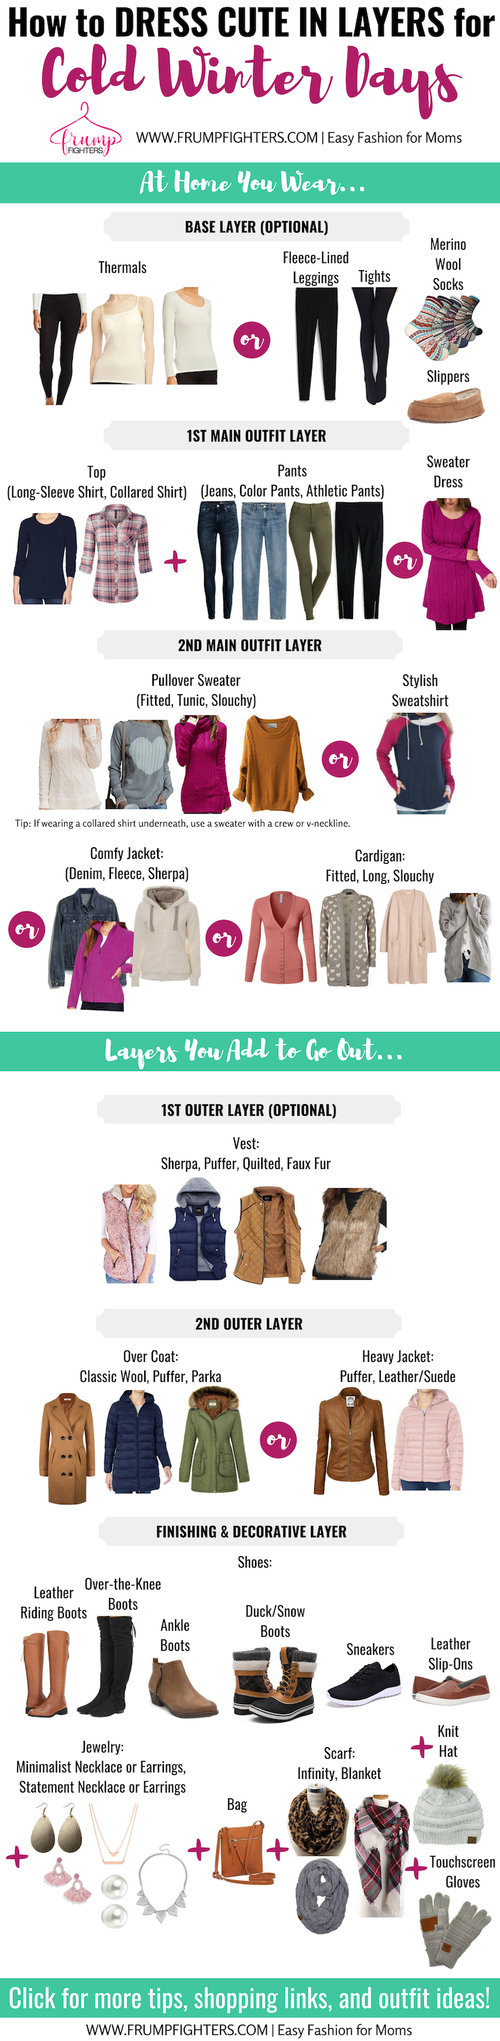 This chart is incredible! It shows you all the simple comfy ways to layer clothes for winter including sweaters, jeans, shoes, leggings, dresses. Warm winter outfits clearly don’t need to be frumpy! This shows me how to layer clothes for cold weather to create cozy but cute outfits on a budget. Click through to the blog post too… it has a list of winter wardrobe essentials and outfit ideas with pictures! #winteroutfits #howtowear #cozy #momstyle